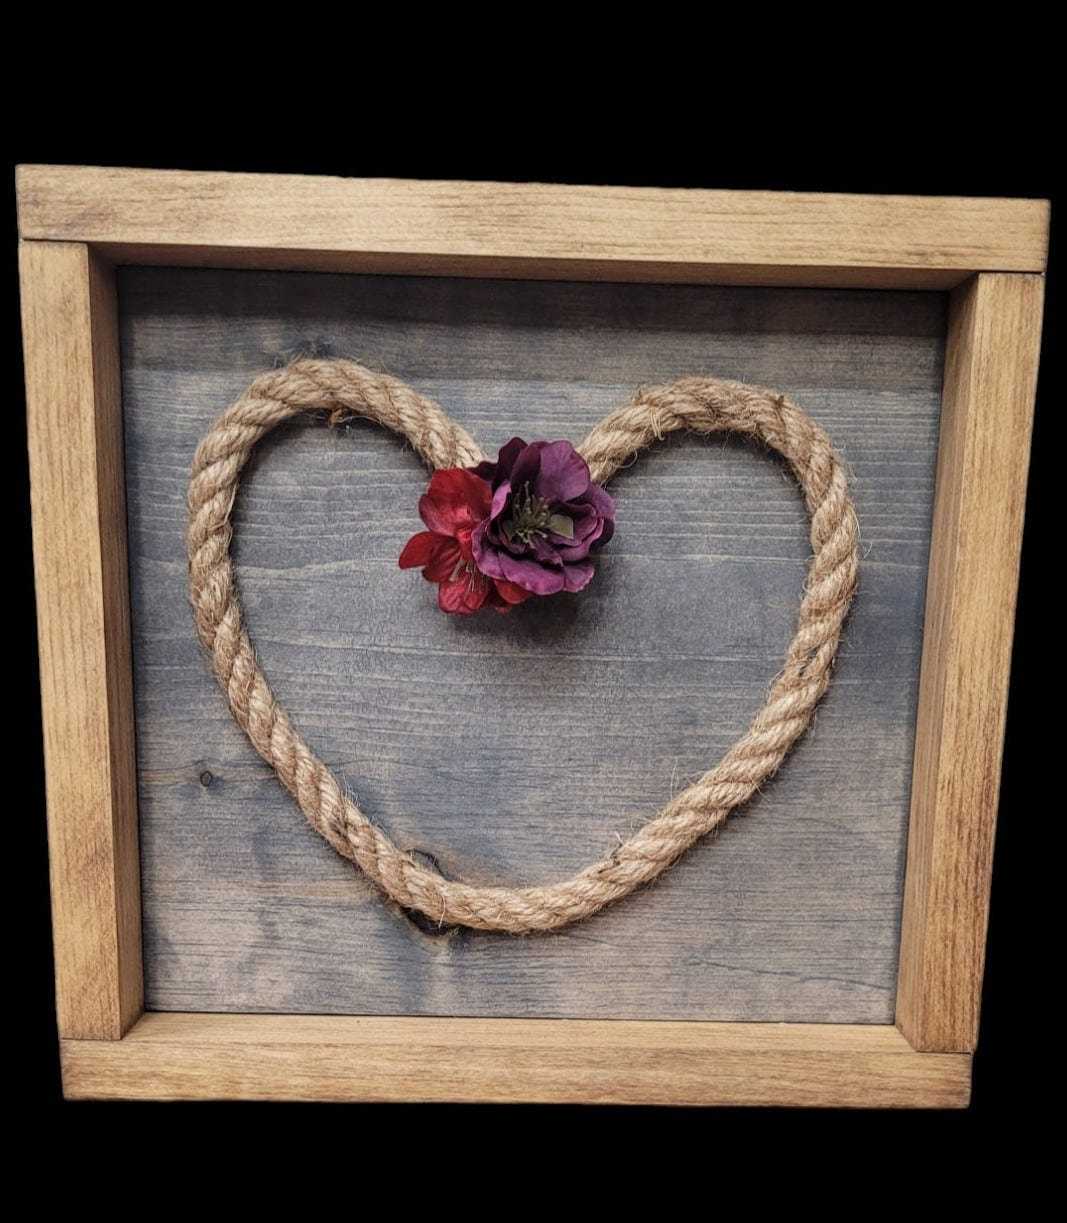  Atlantic Wood N Wares  Home Decor >Wall Decor Single Rustic Love Heart Wall Art with Flower Accents Ropewallart01